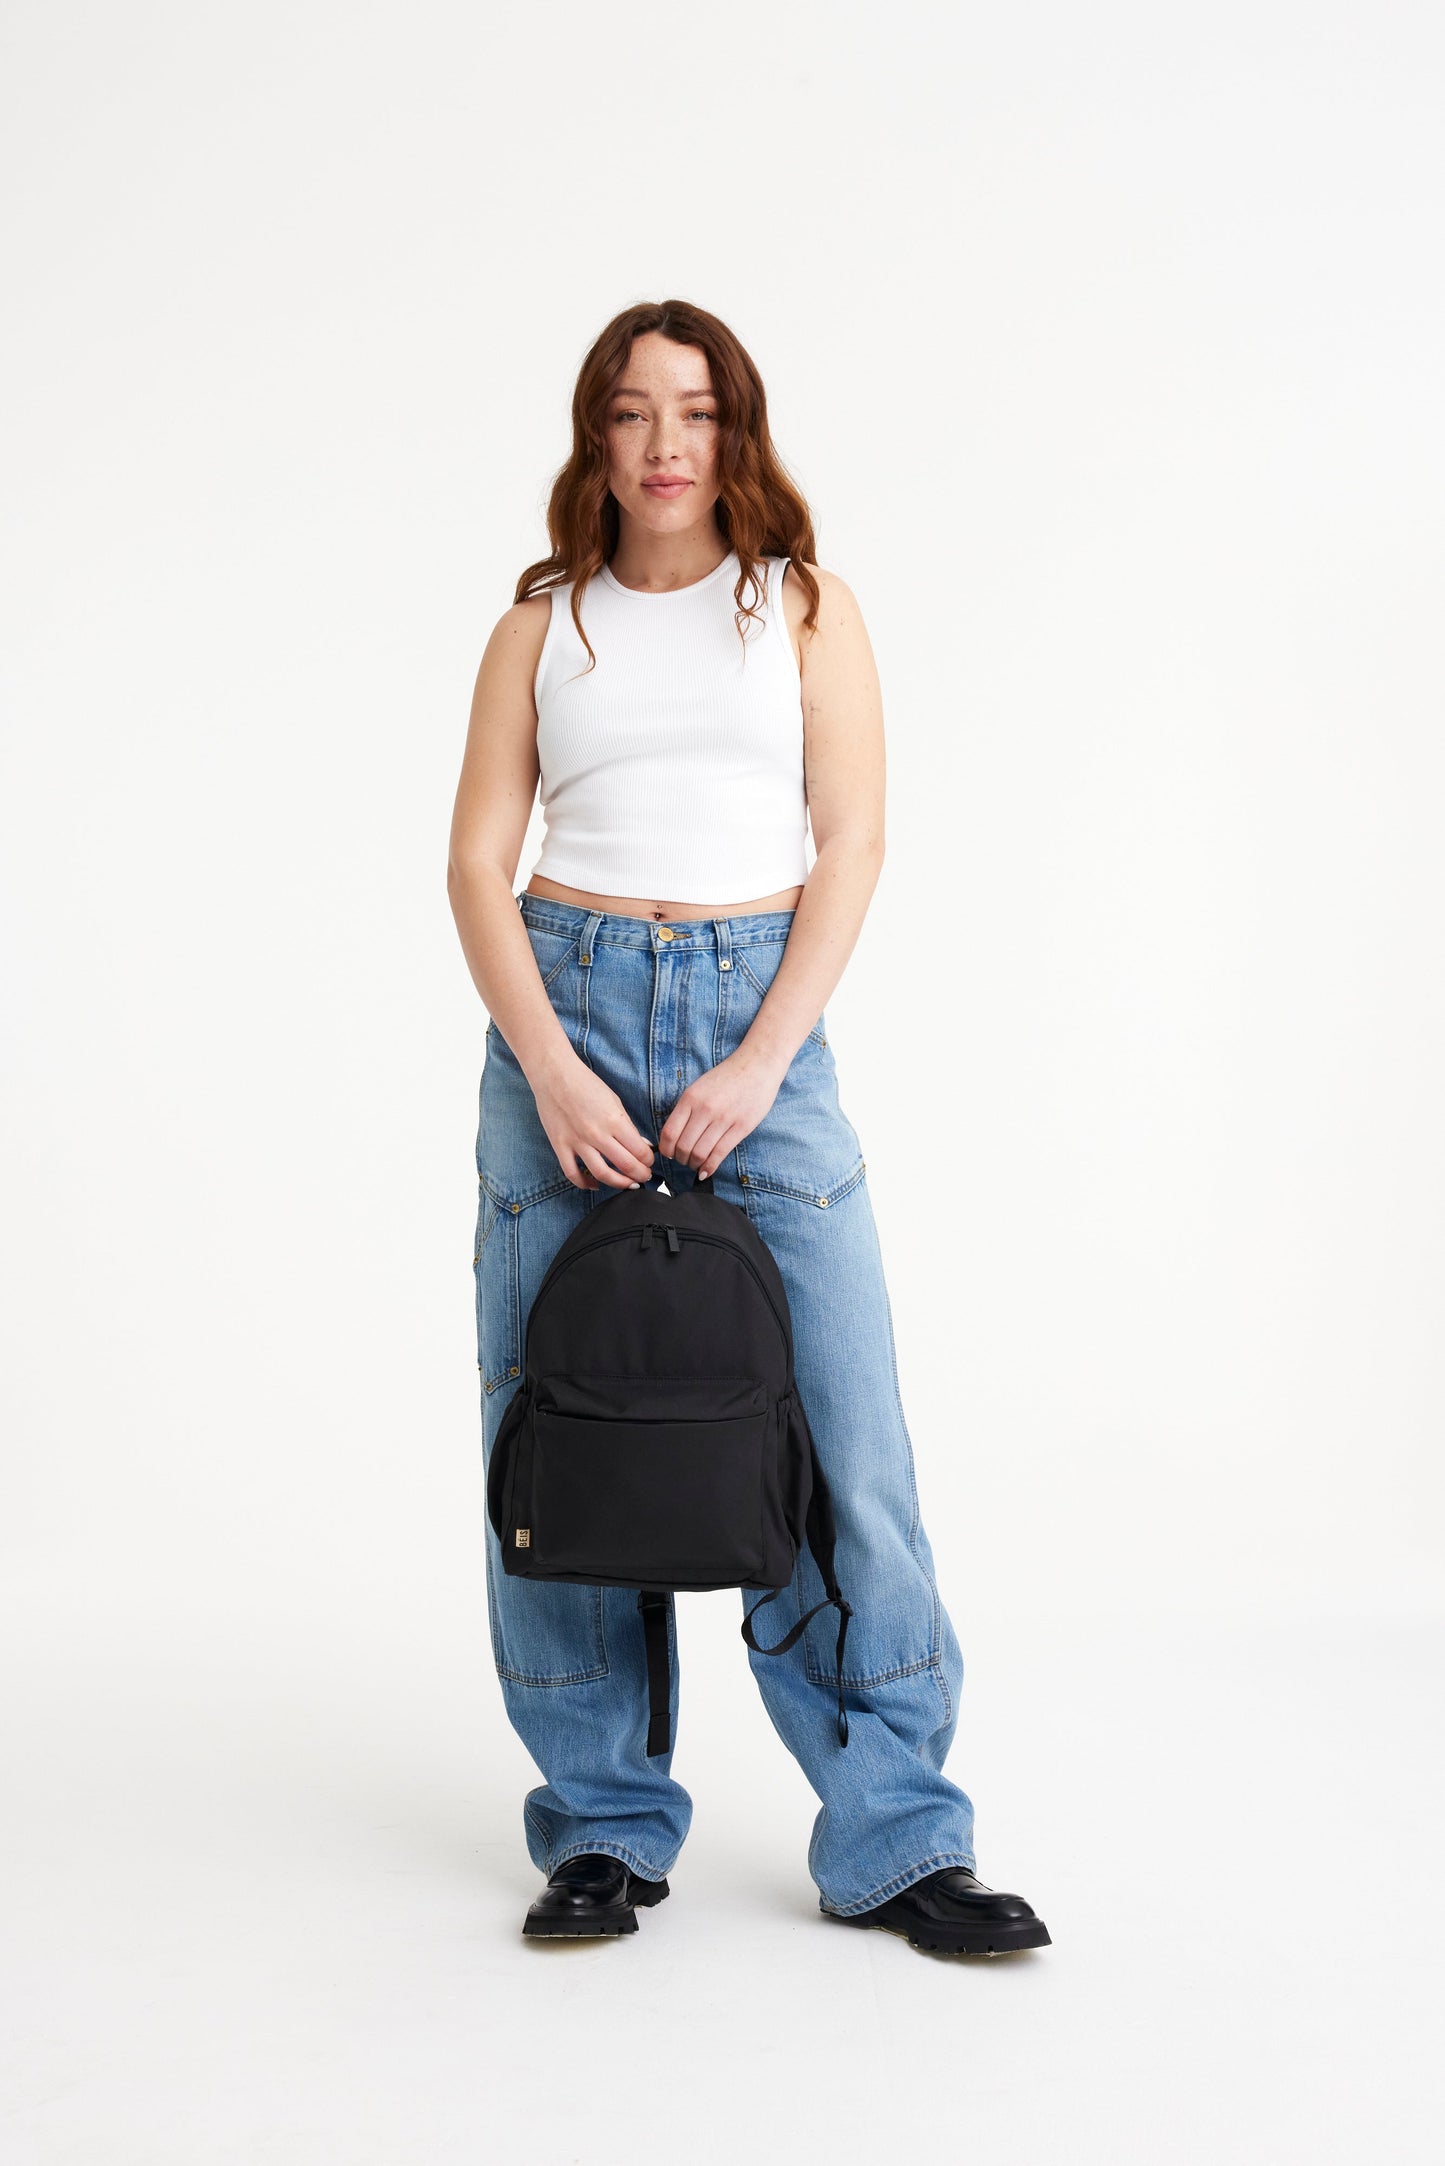 The BÉISics Backpack in Black